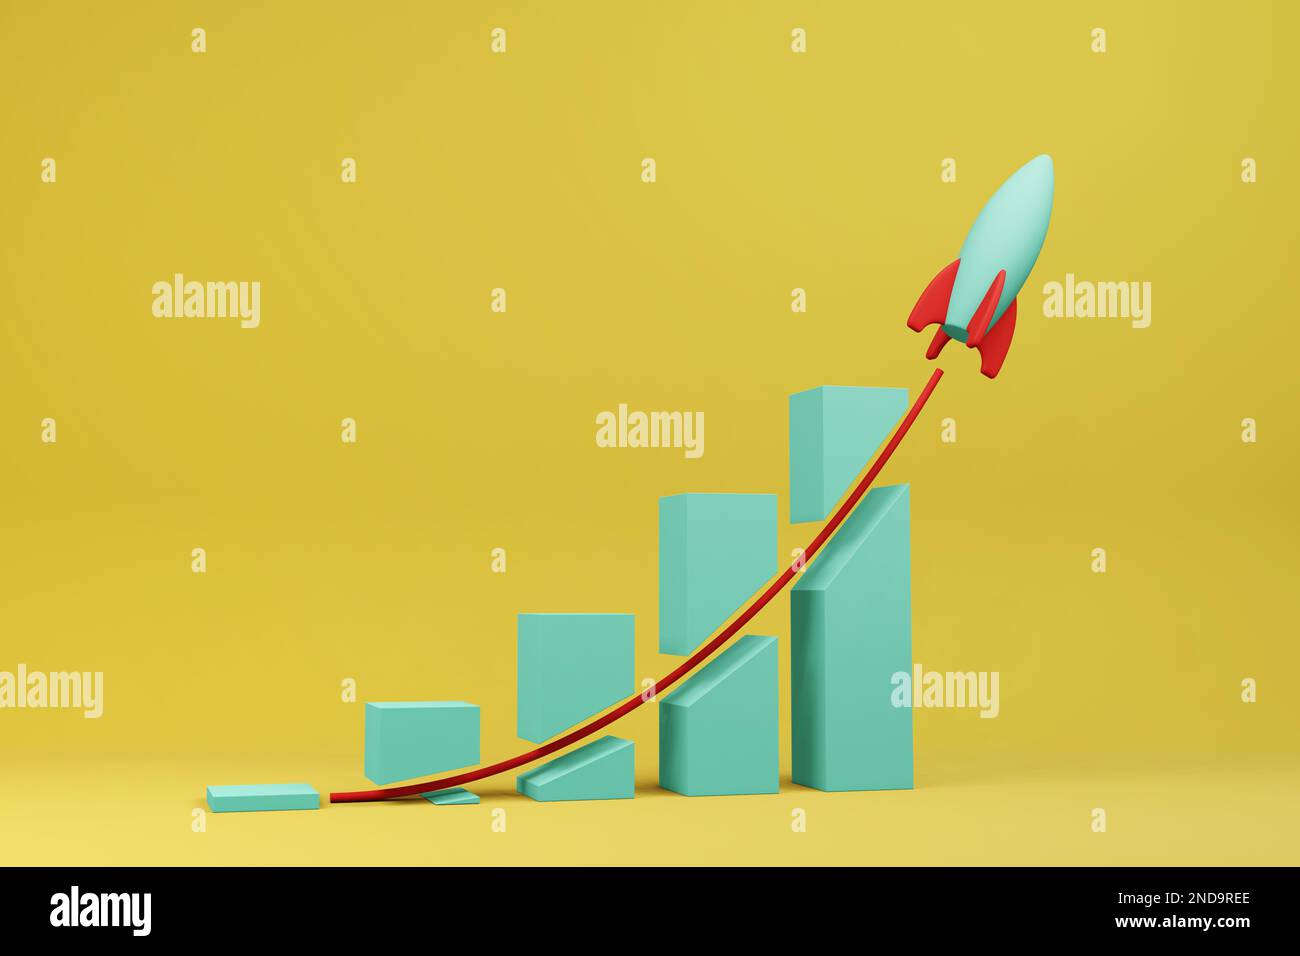 Toy rocket flying through a business bar chart. Illustration of the concept of profitable sale and increasing revenue Stock Photo